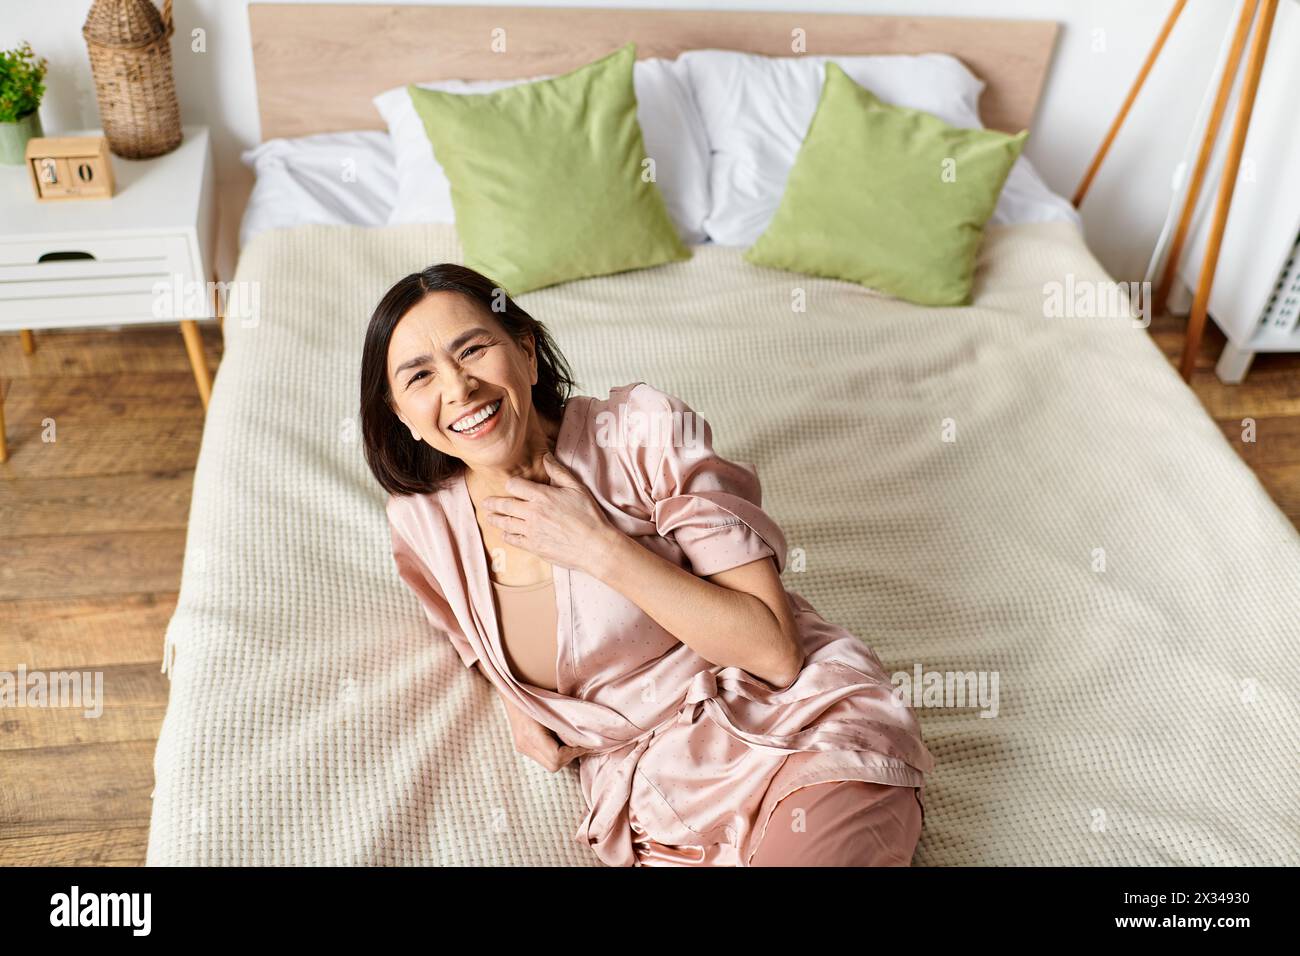 Mature woman relaxes on pink bed in cozy robe. Stock Photo